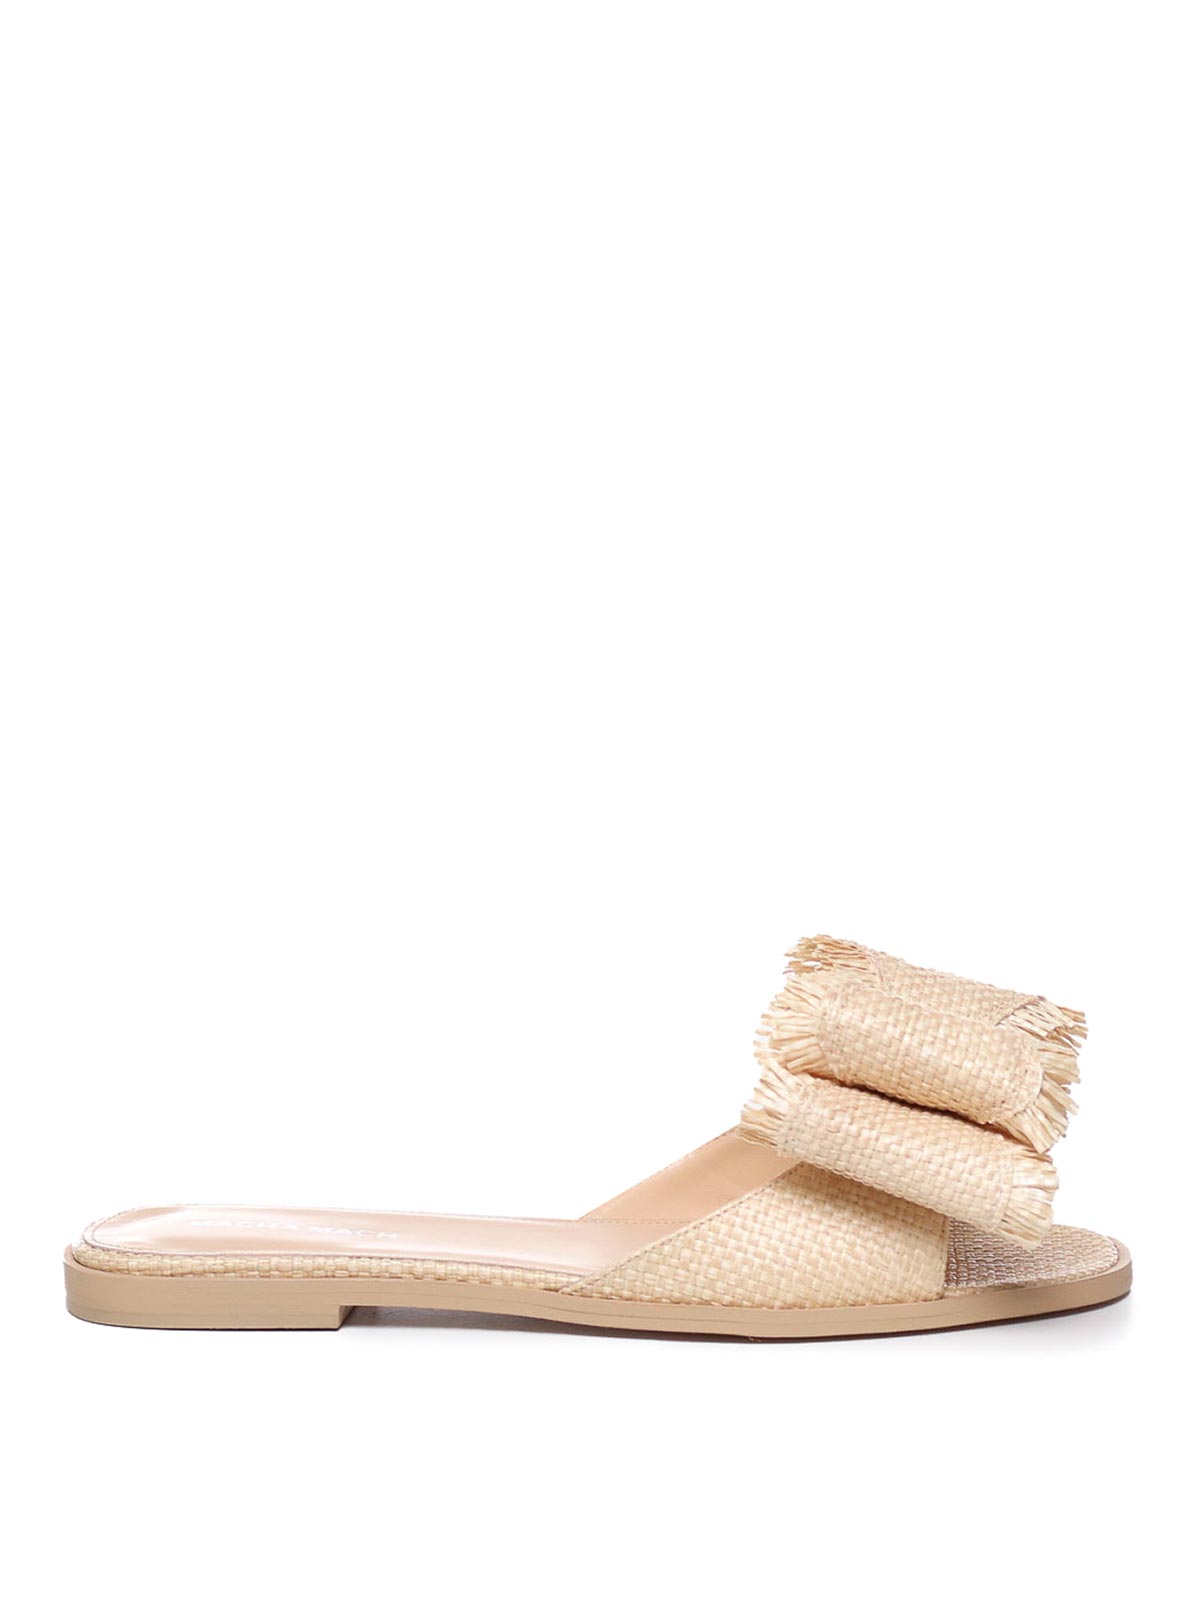 Mach & Mach Flat Sandal In Rope And Leather In Beige